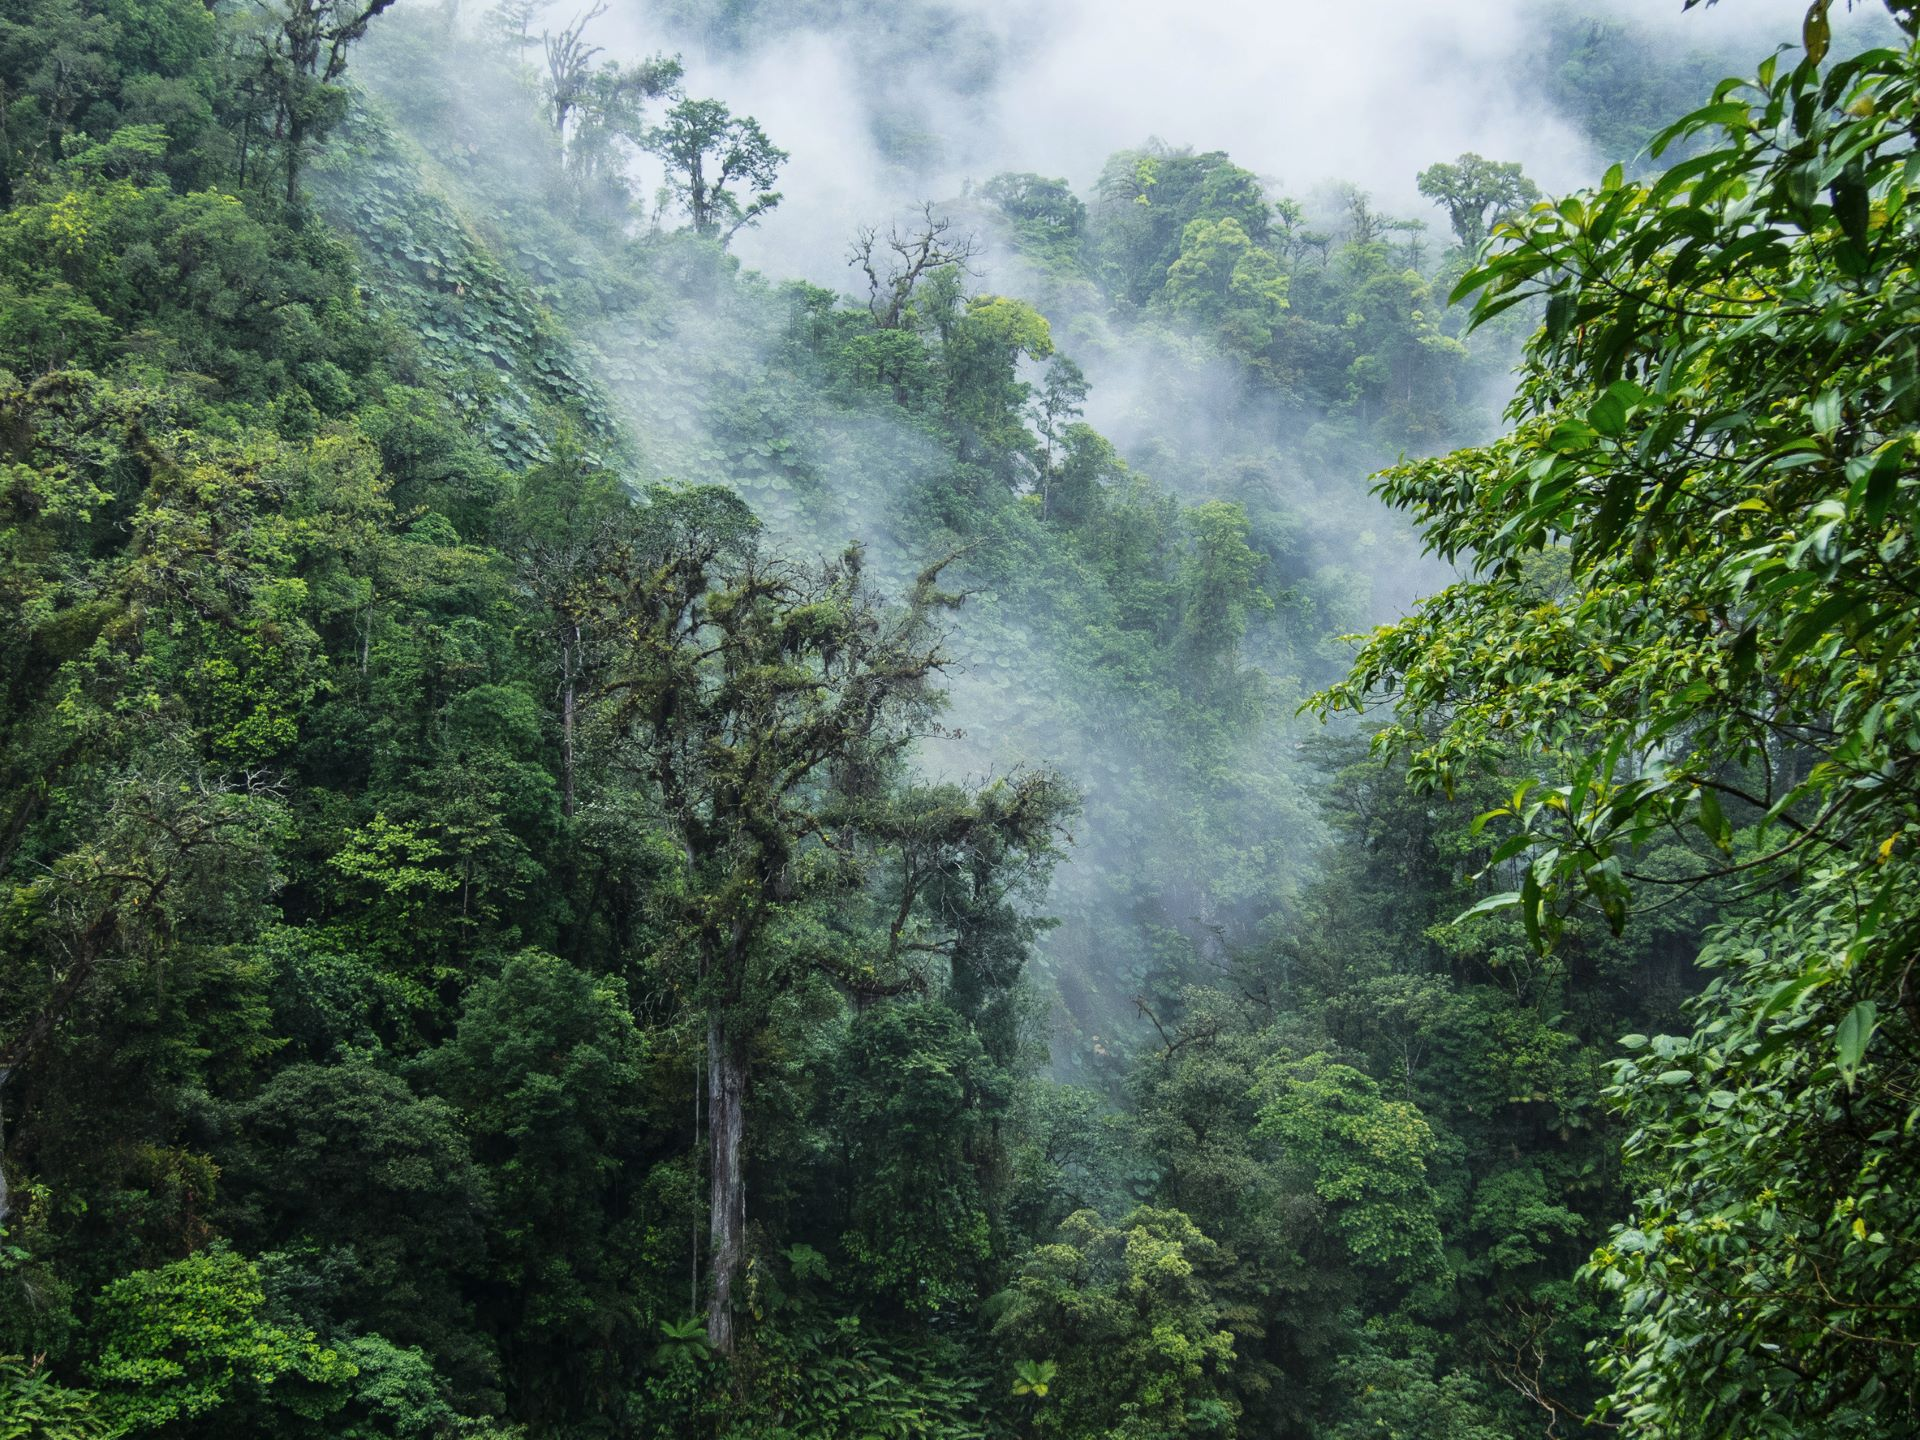 Visit Monteverde and explore the cloud forest reserves to embrace the true essence of this place.